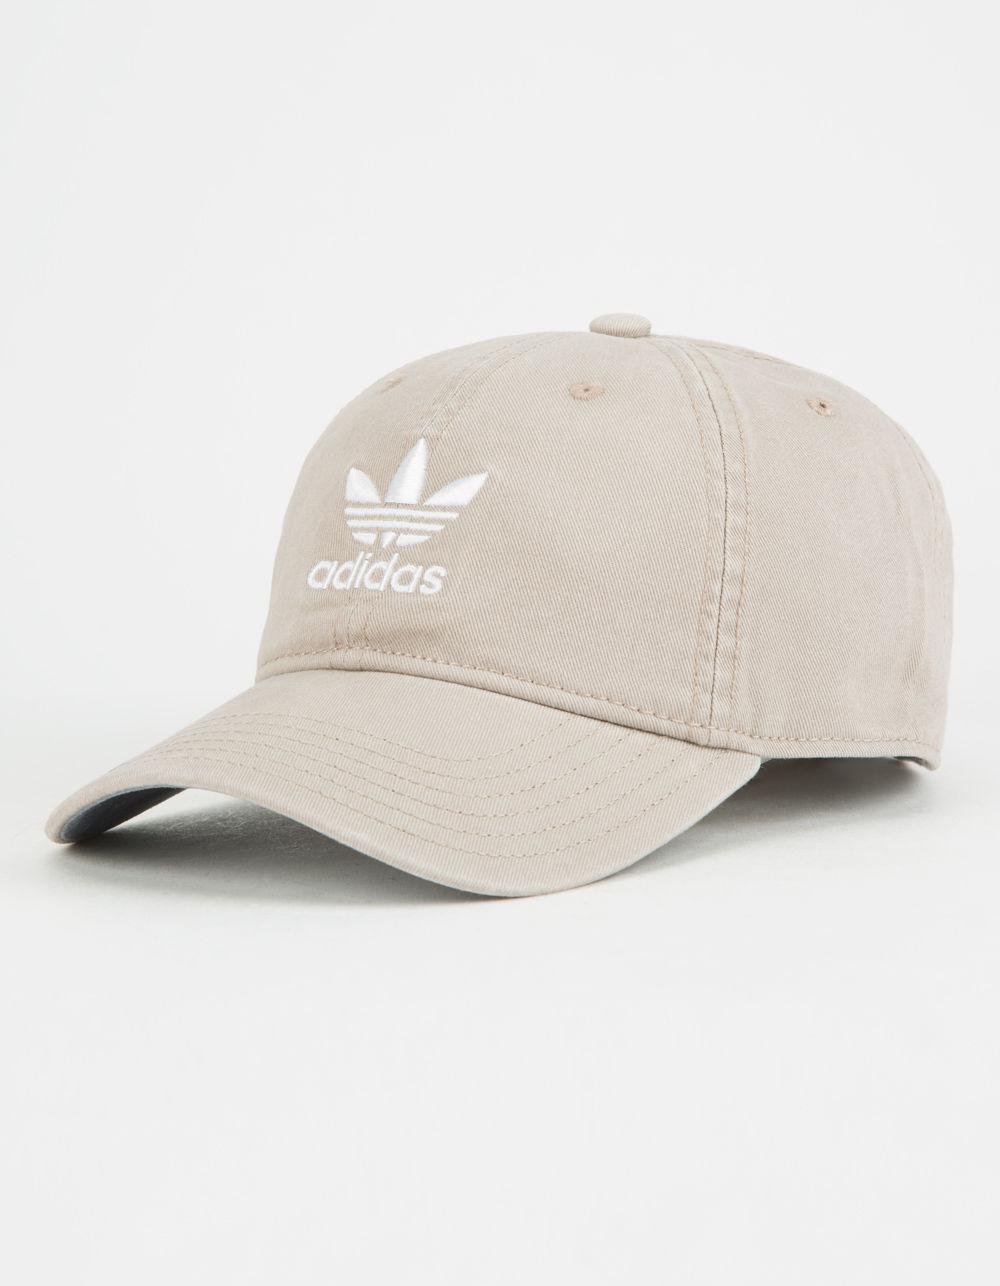 adidas Cotton Originals Relaxed Khaki Mens Dad Hat in Natural for Men